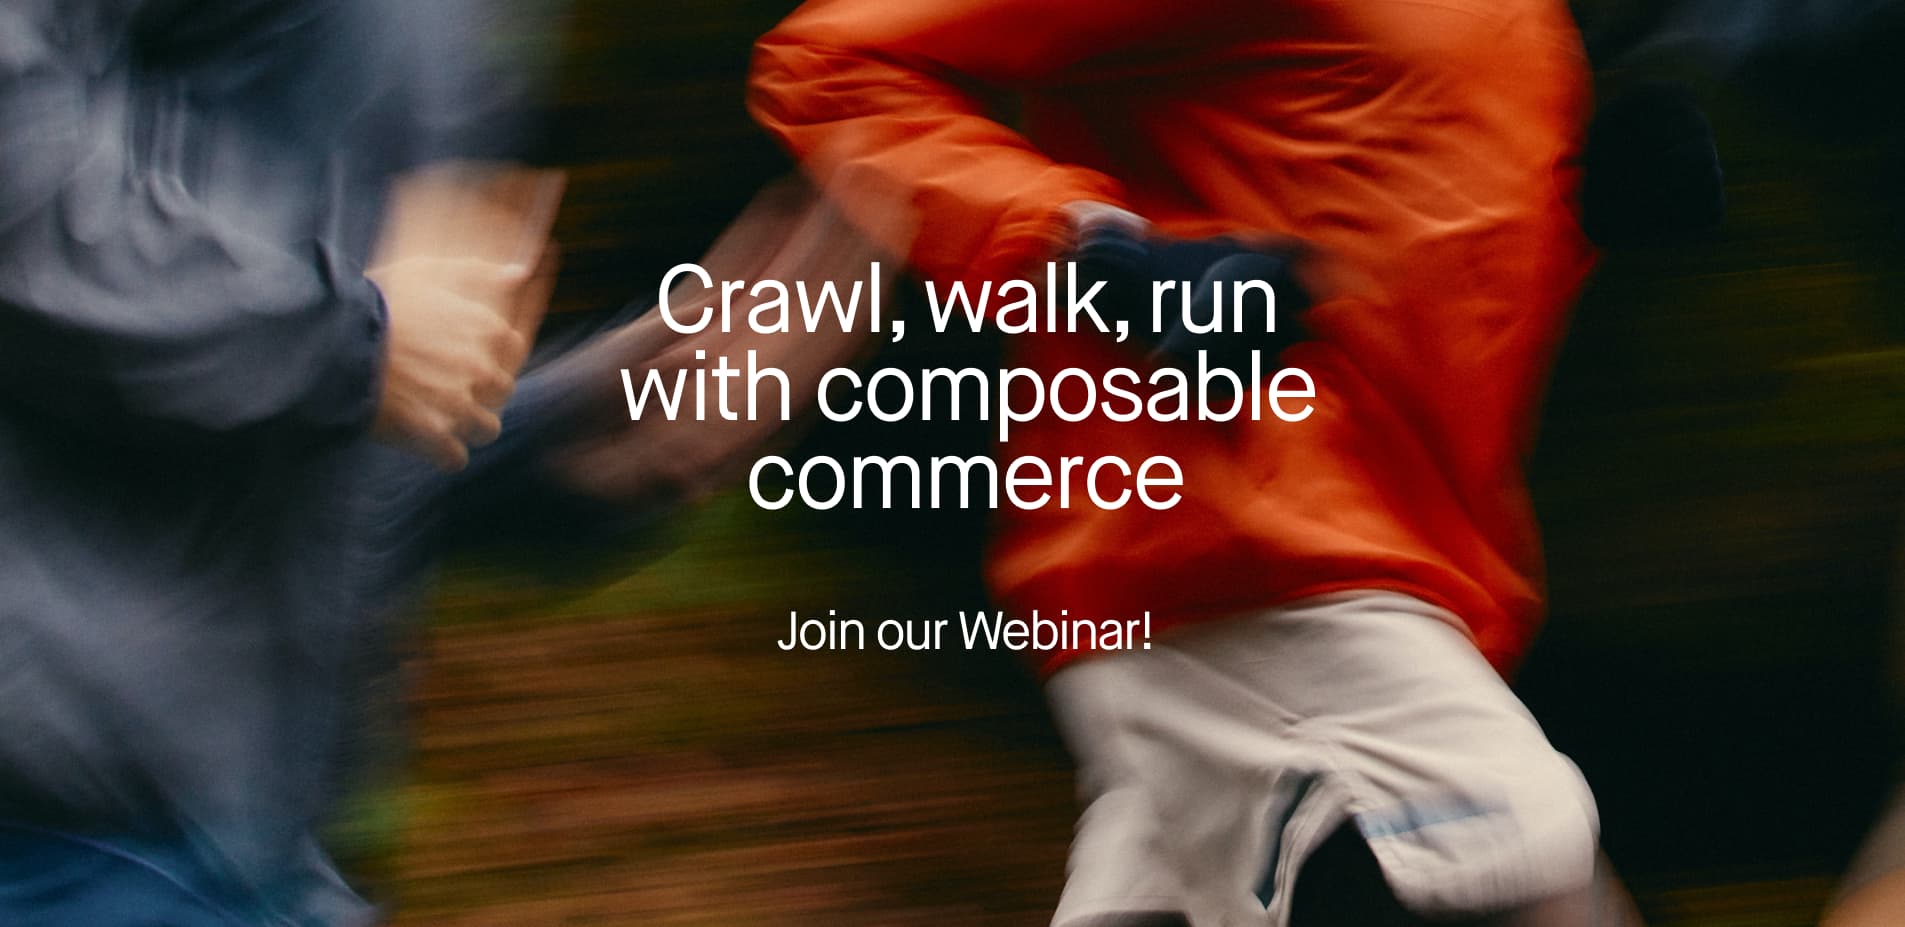 Crawl walk run with composable commerce event header 1905x927 1